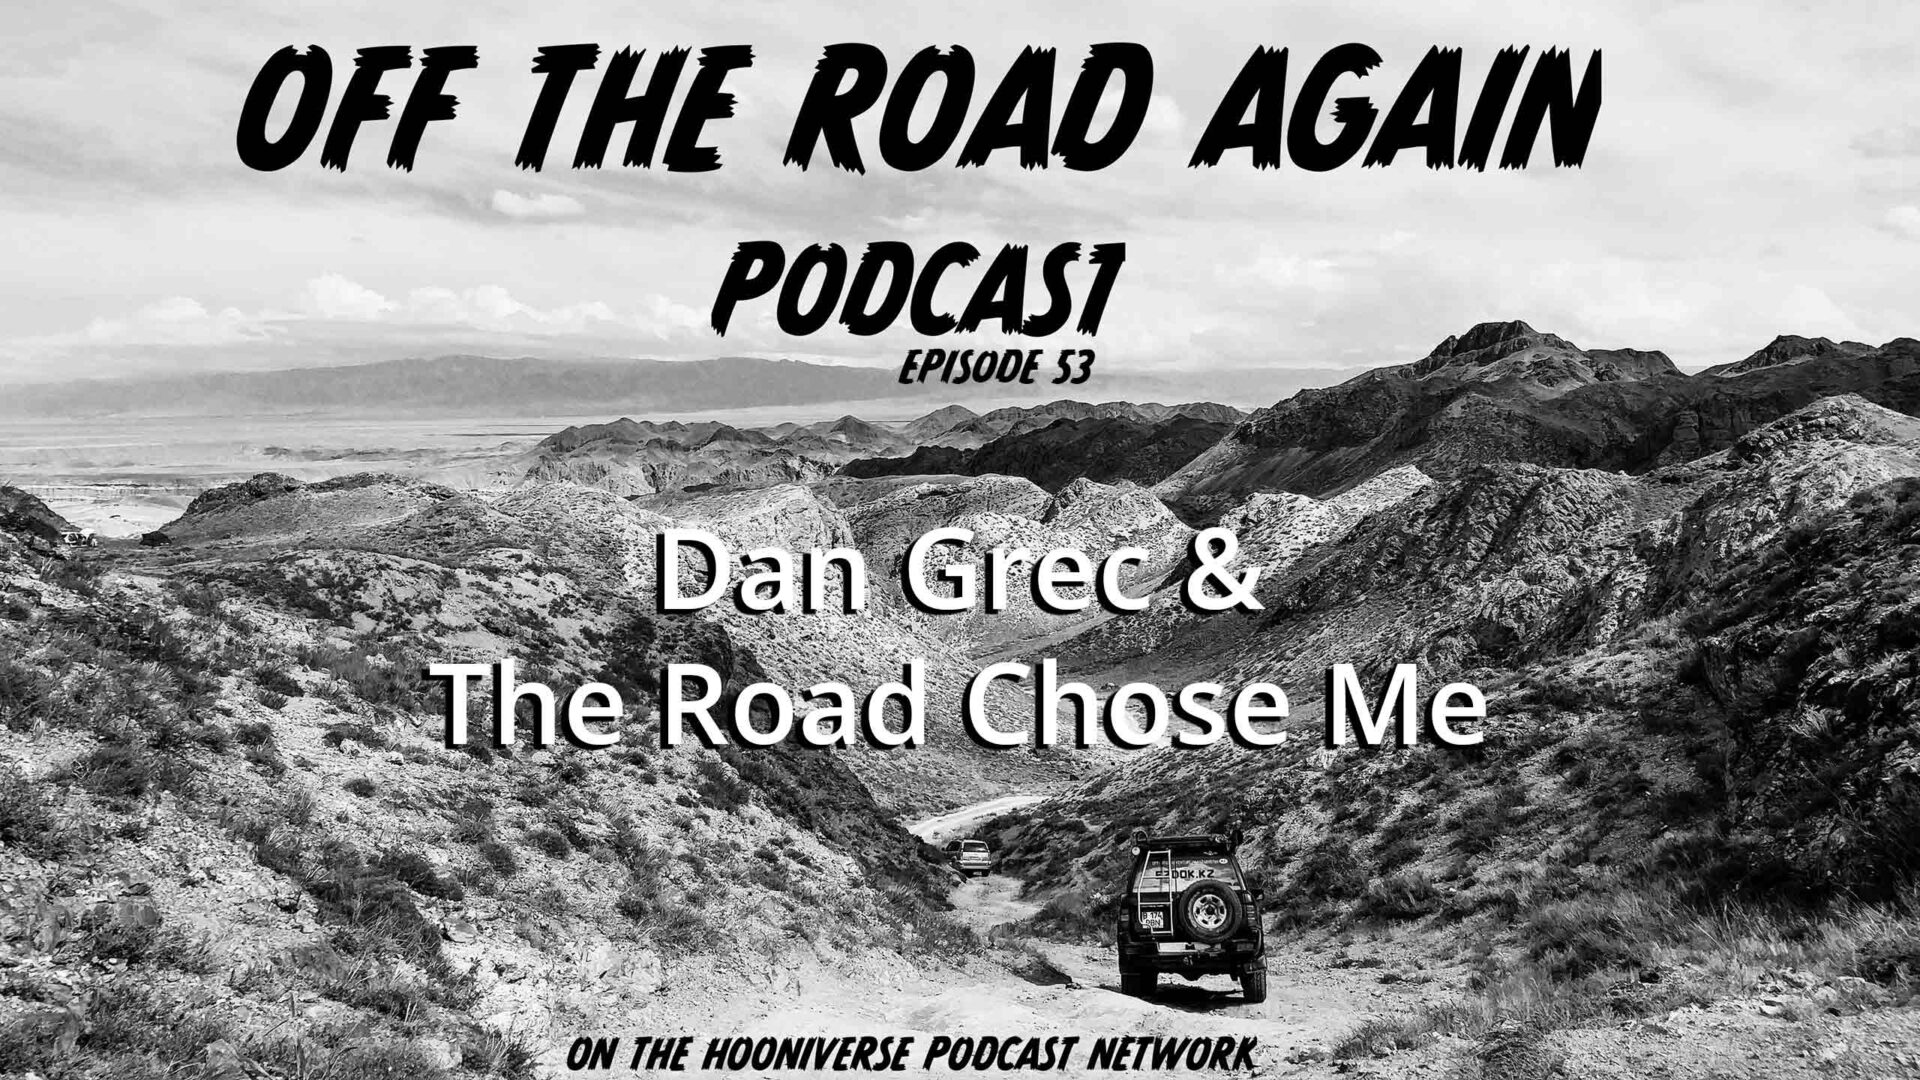 Dan-Grec-The-Road-Chose-Me-Off-The-Road-Again-Podcast-Episode-53